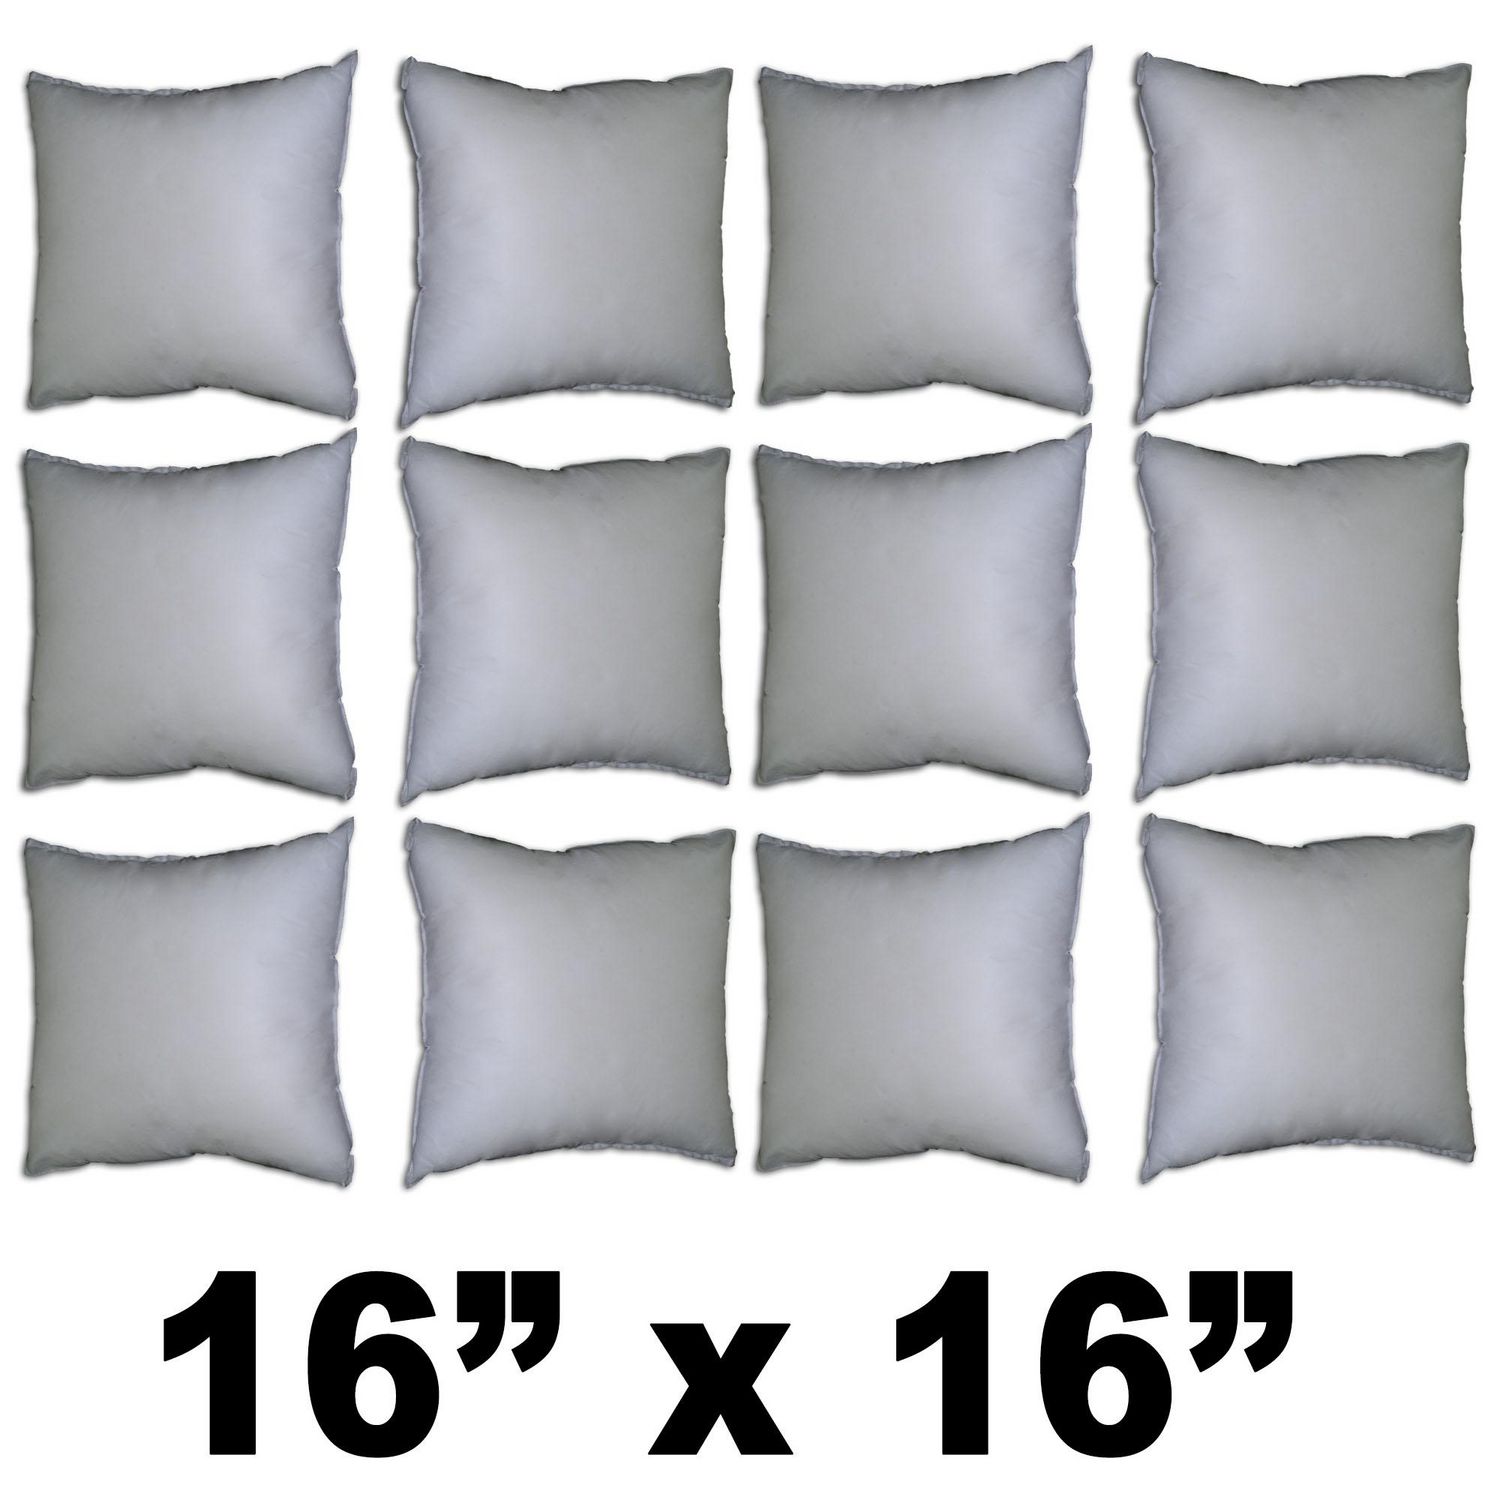 Hometex Square Polyester Fill Pillow Form | Walmart Canada